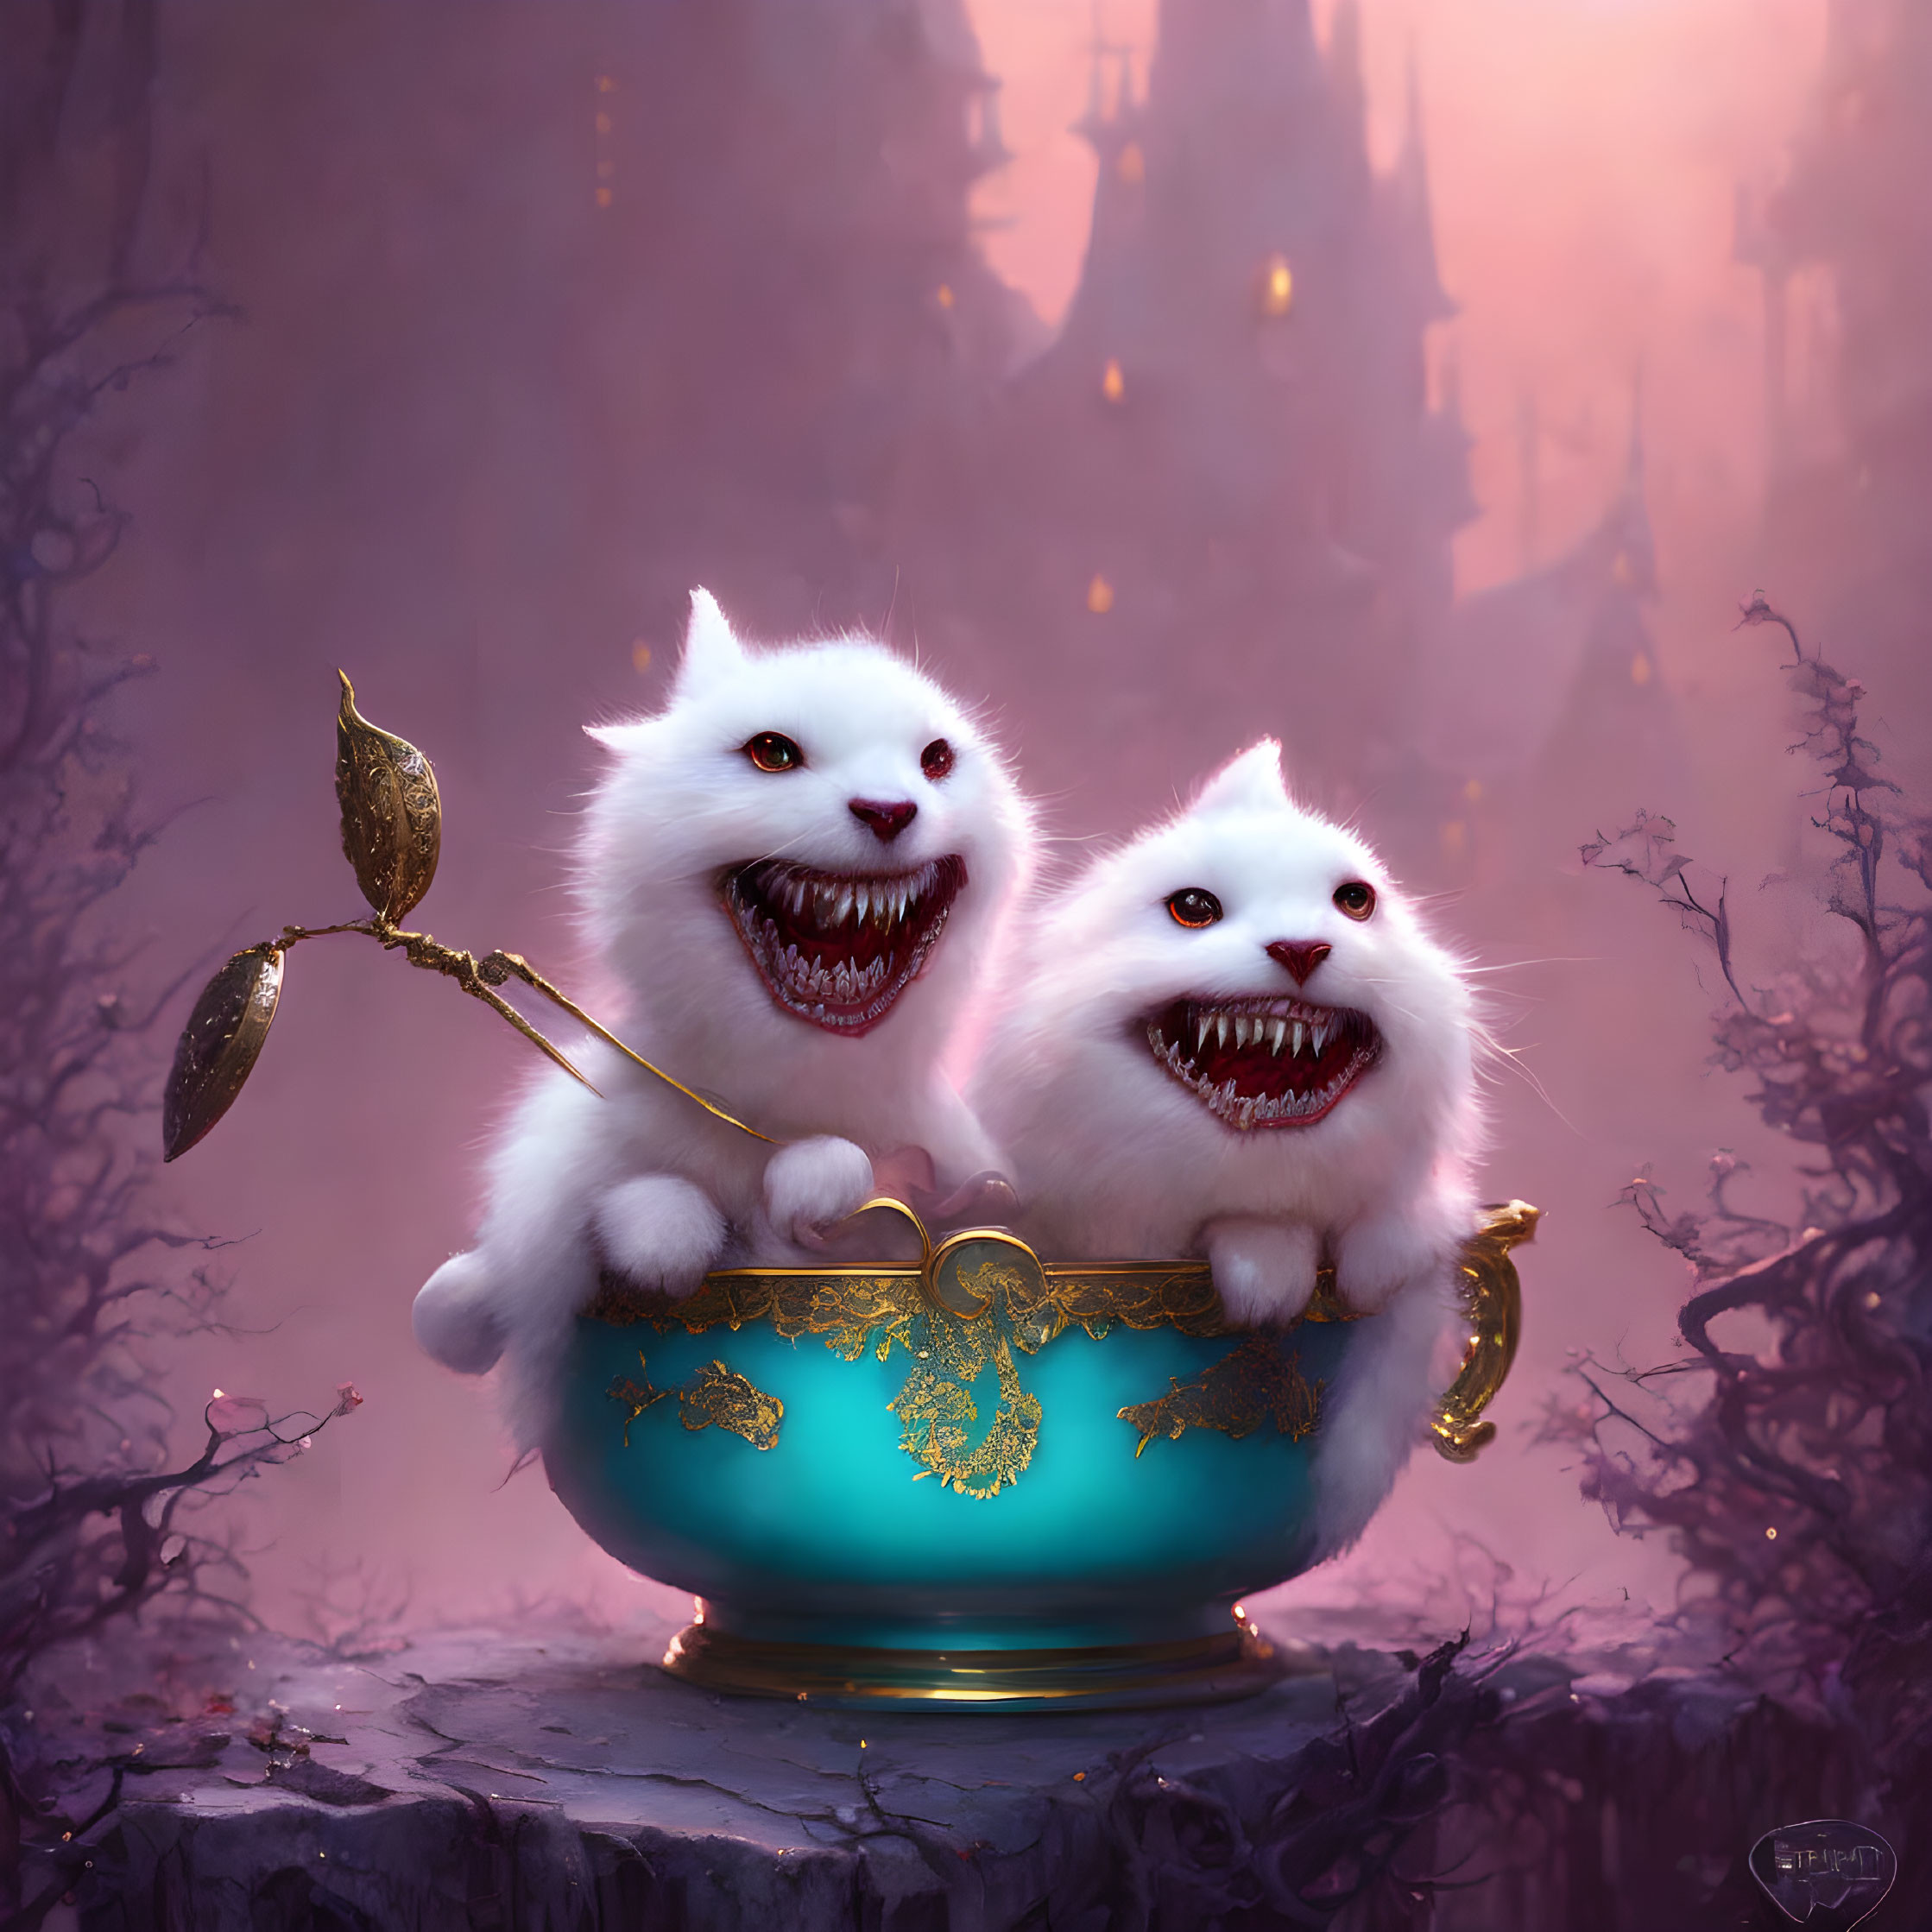 Fantastical white cats in teal bowl with golden spoon, gothic castle background